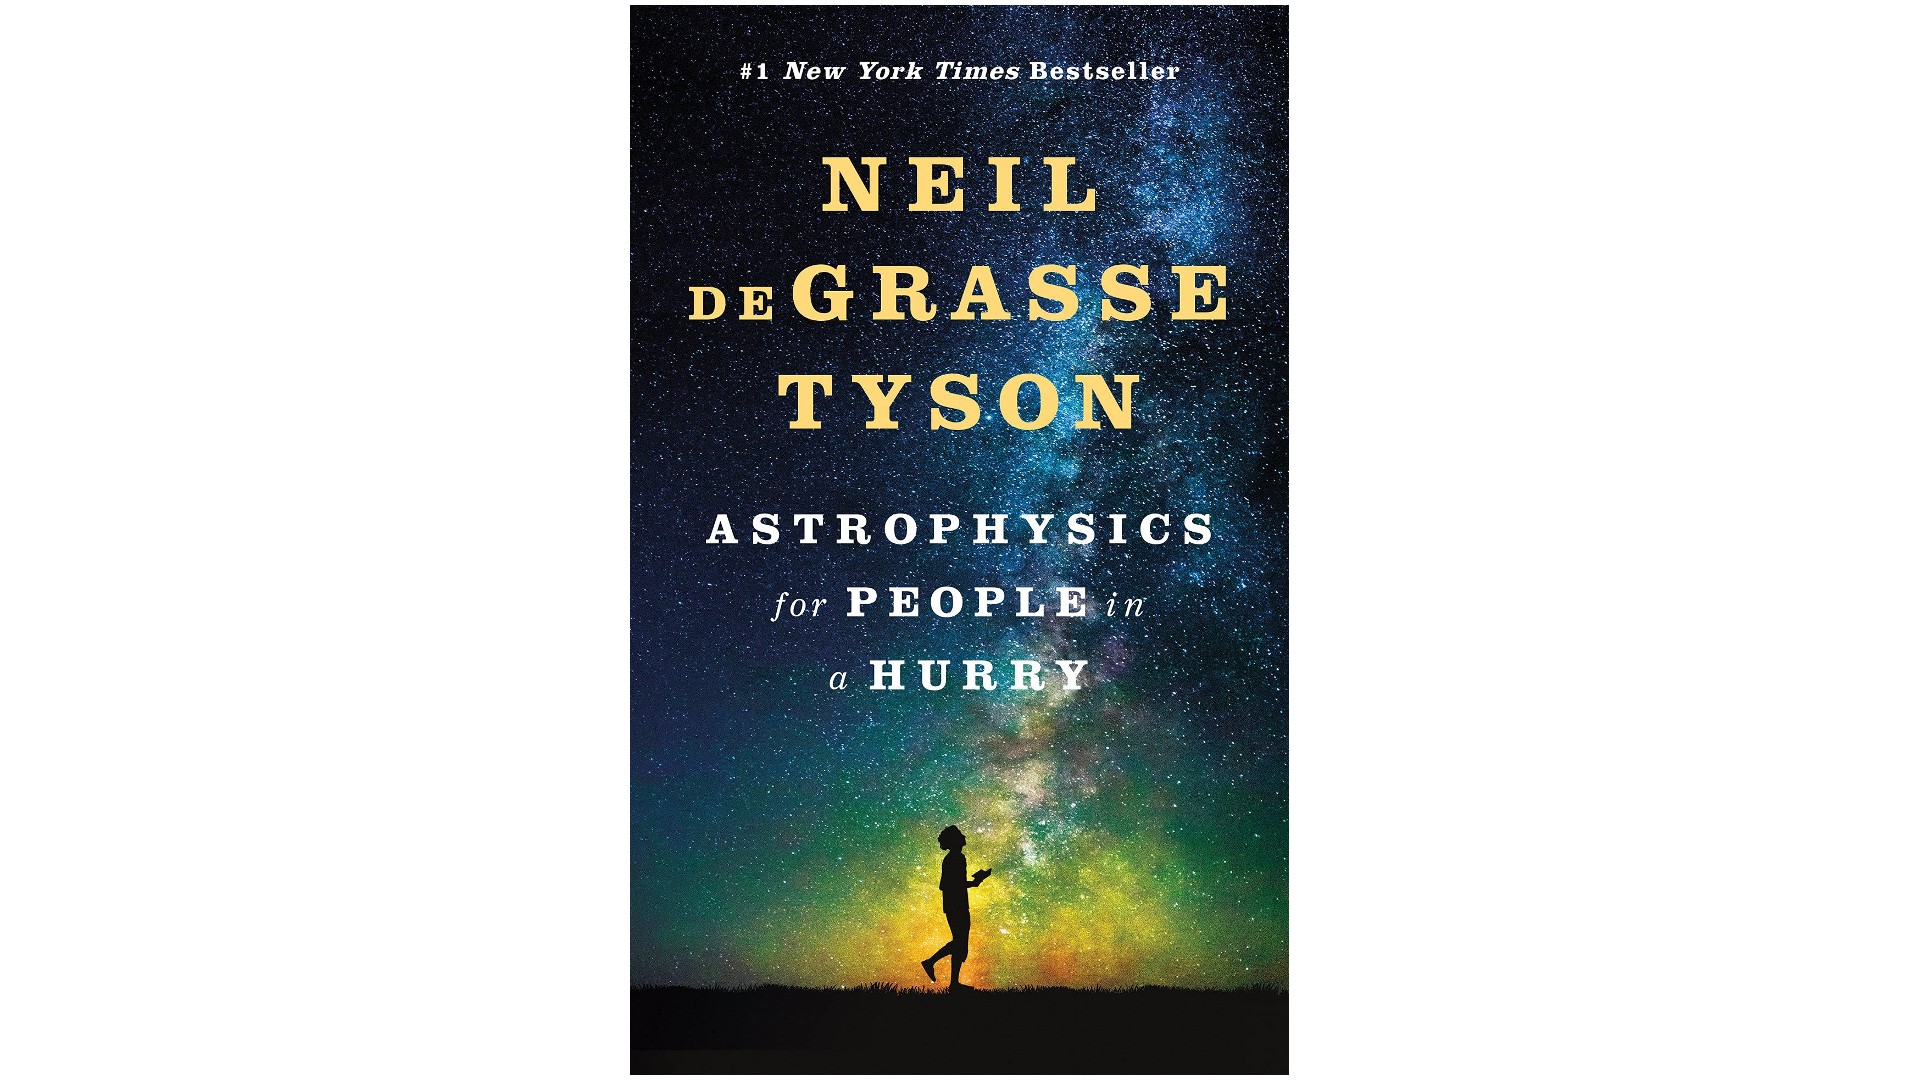 Astrophysics for People in a Hurry by Neil deGrasse Tyson